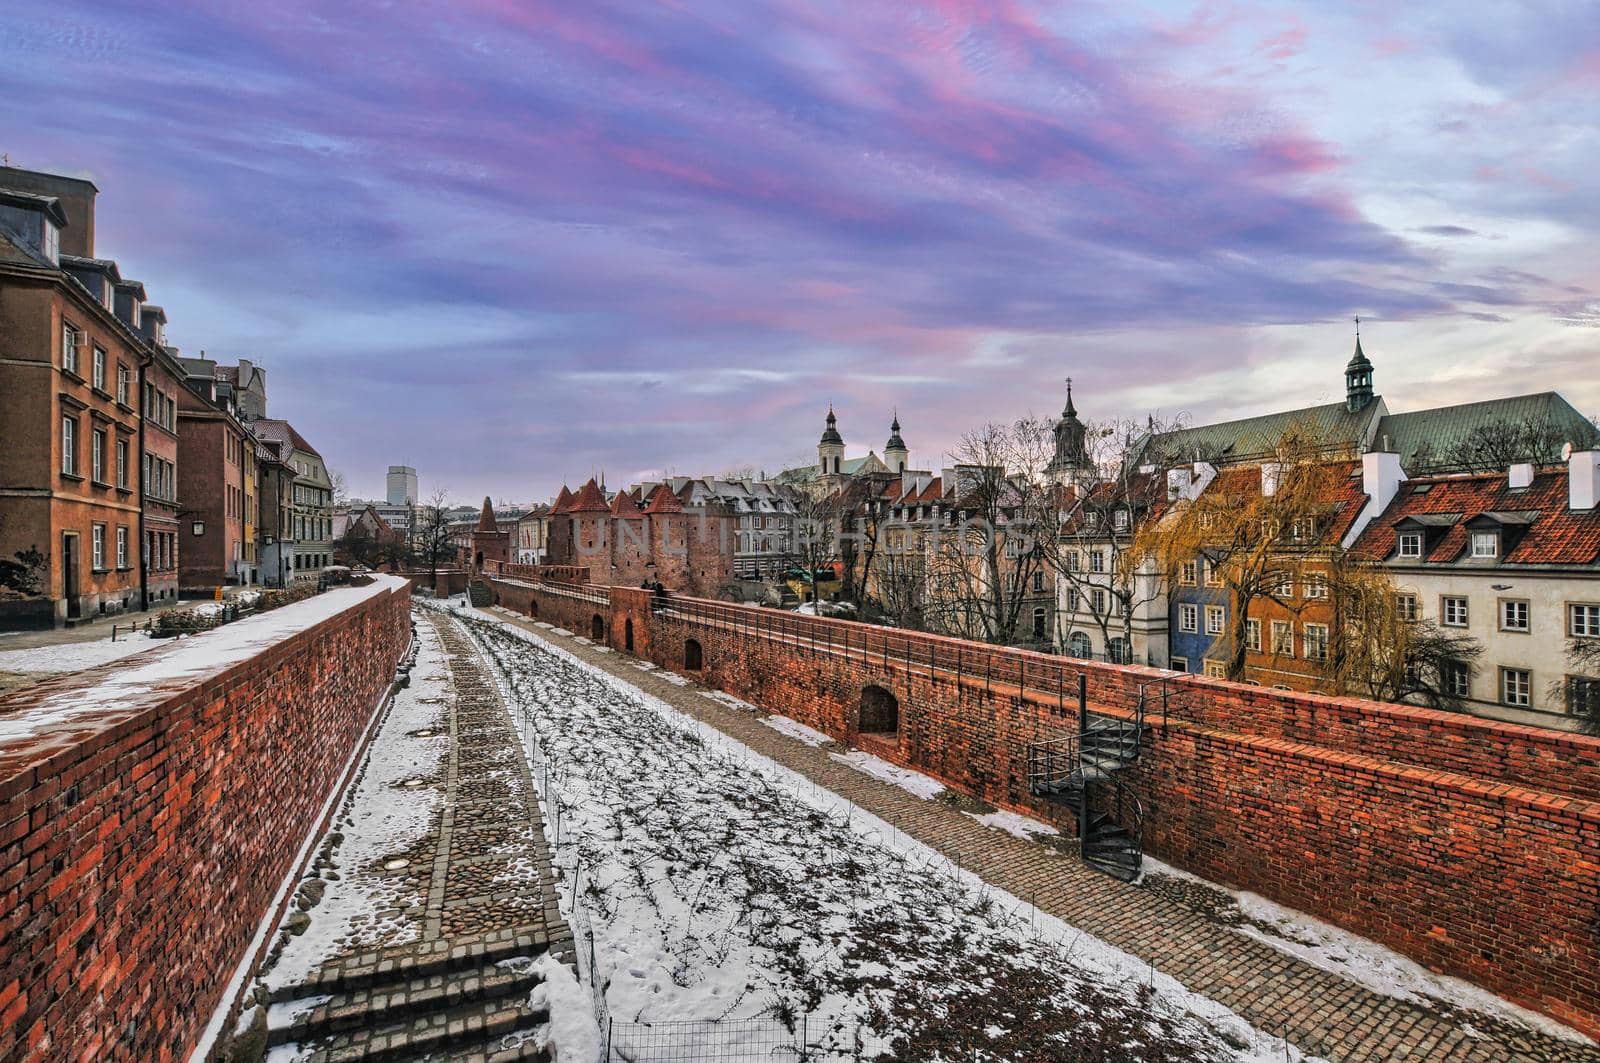 Warsaw or Warszawa city in Poland with rich history and historical buildings